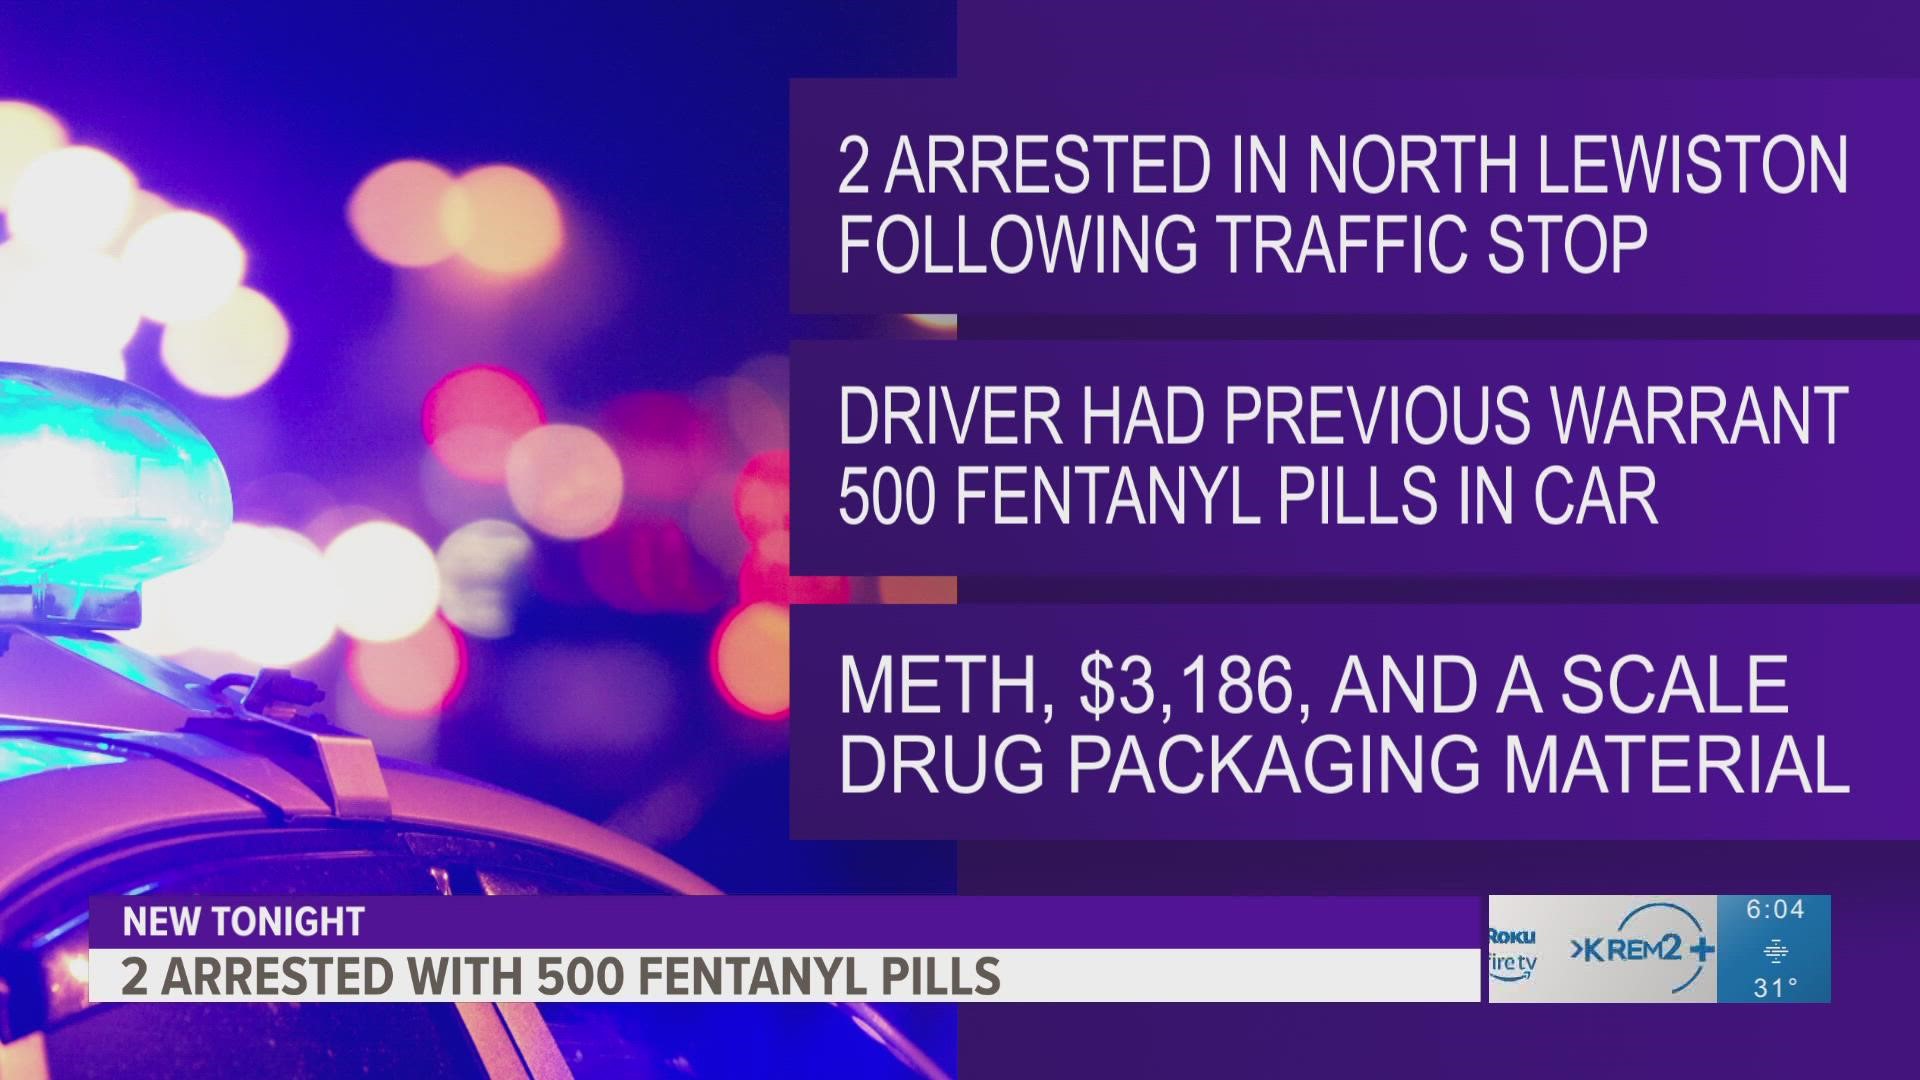 The passenger of the vehicle was arrested with intent to deliver and possession of fentanyl and methamphetamine.